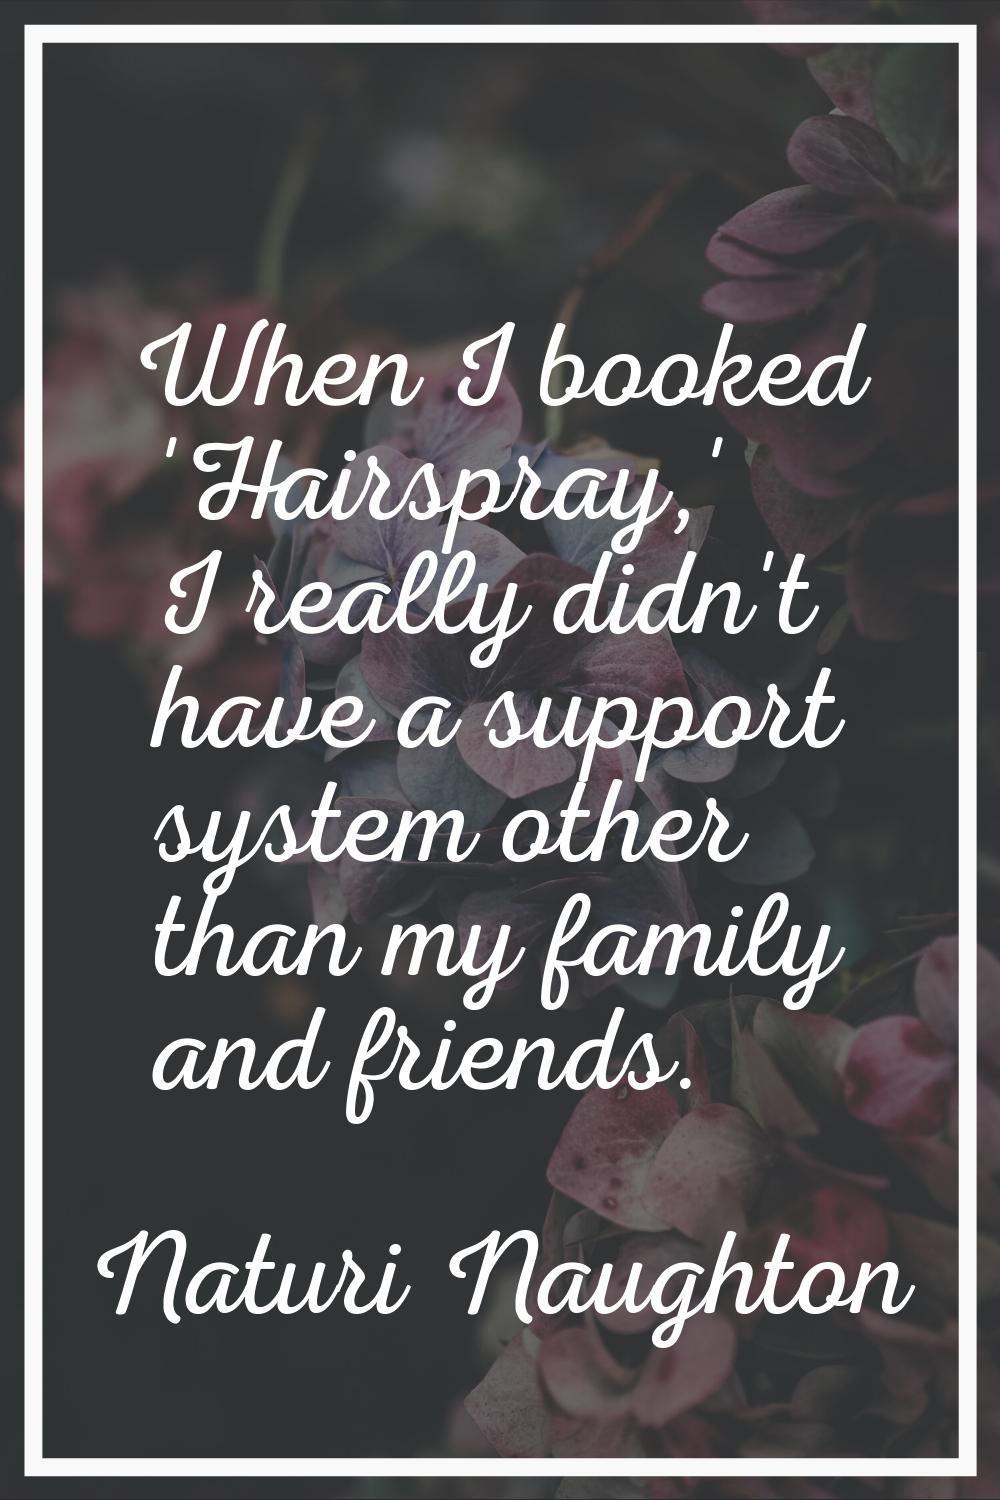 When I booked 'Hairspray,' I really didn't have a support system other than my family and friends.